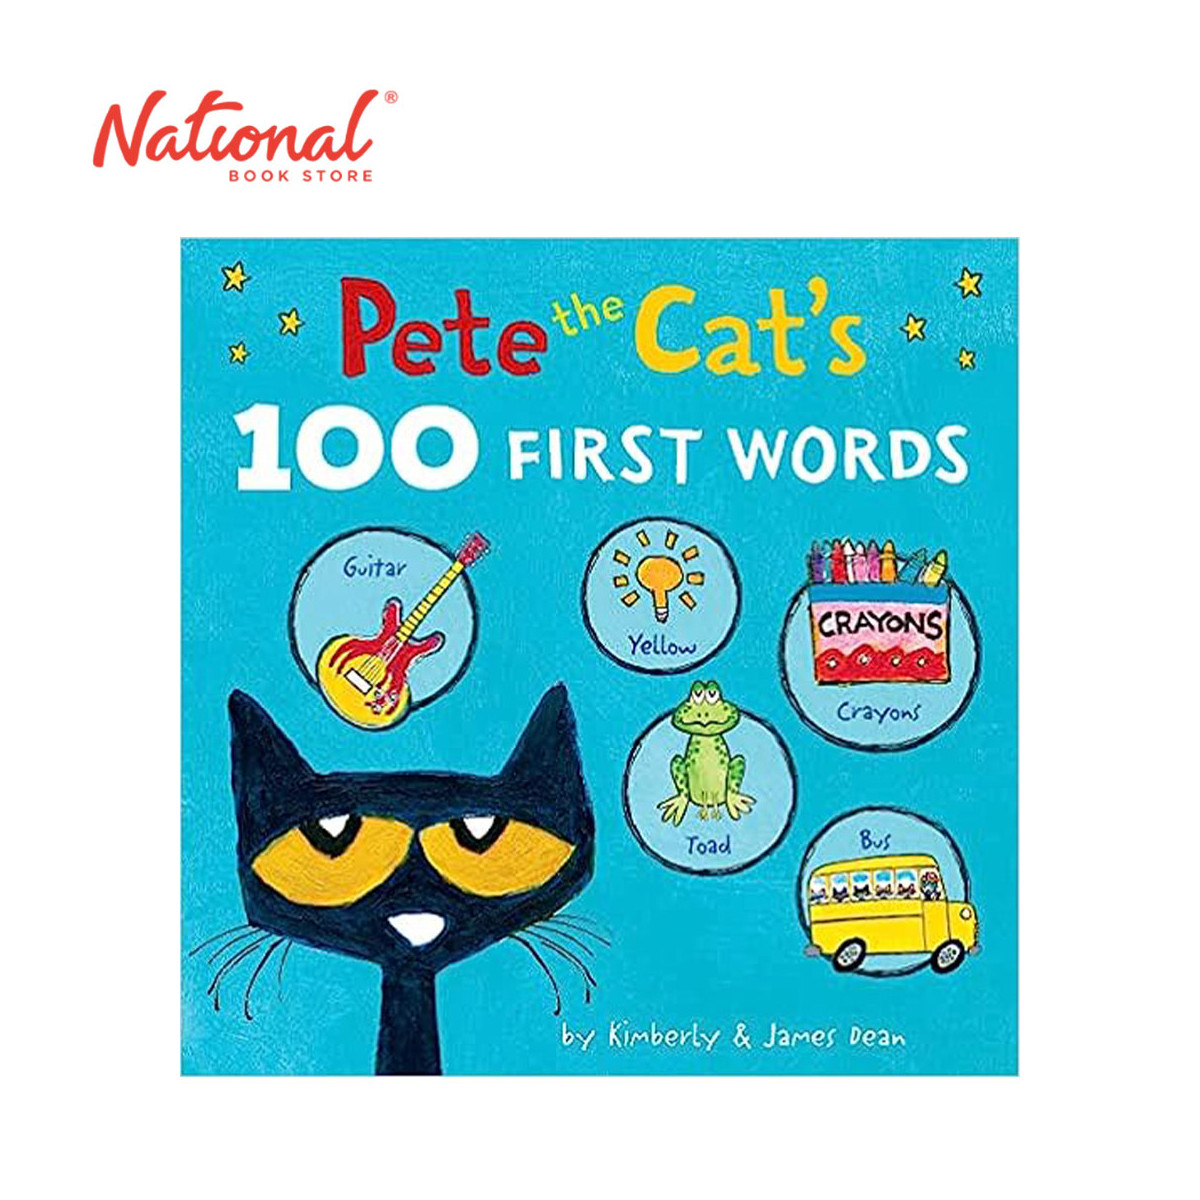 Pete The Cat's 100 First Words By James Dean - Board Book - Books for Kids